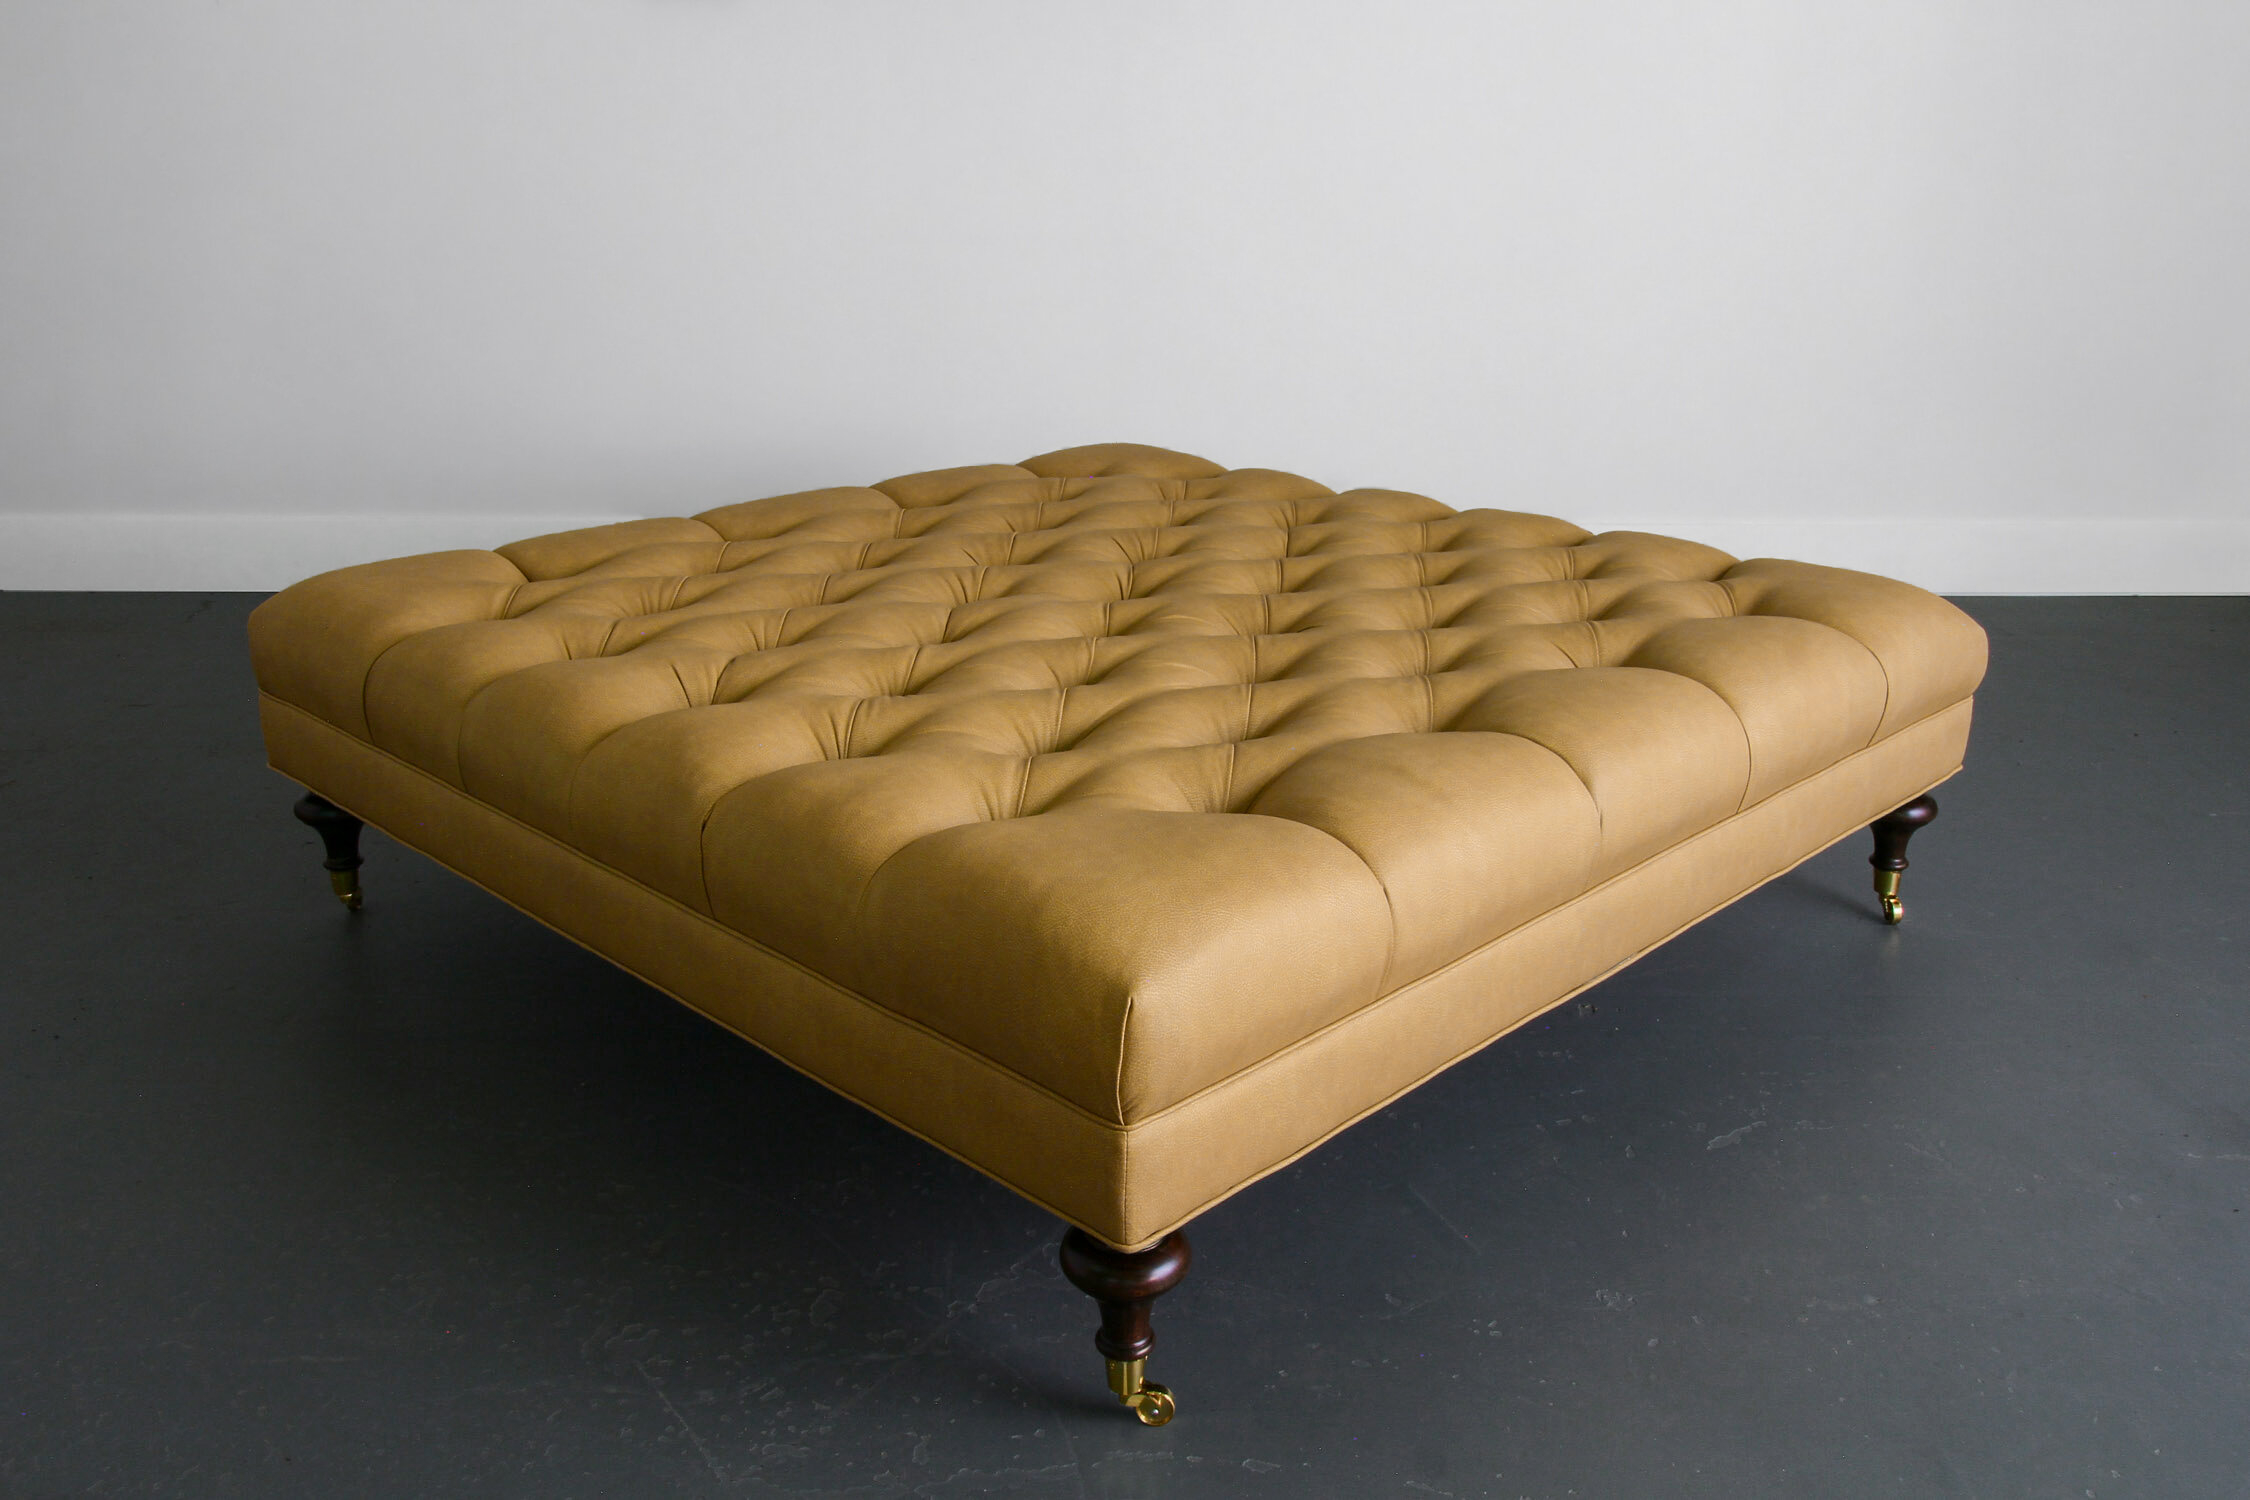 Custom Leather Tufted Ottoman with Turned Wooden Legs on Brass Casters